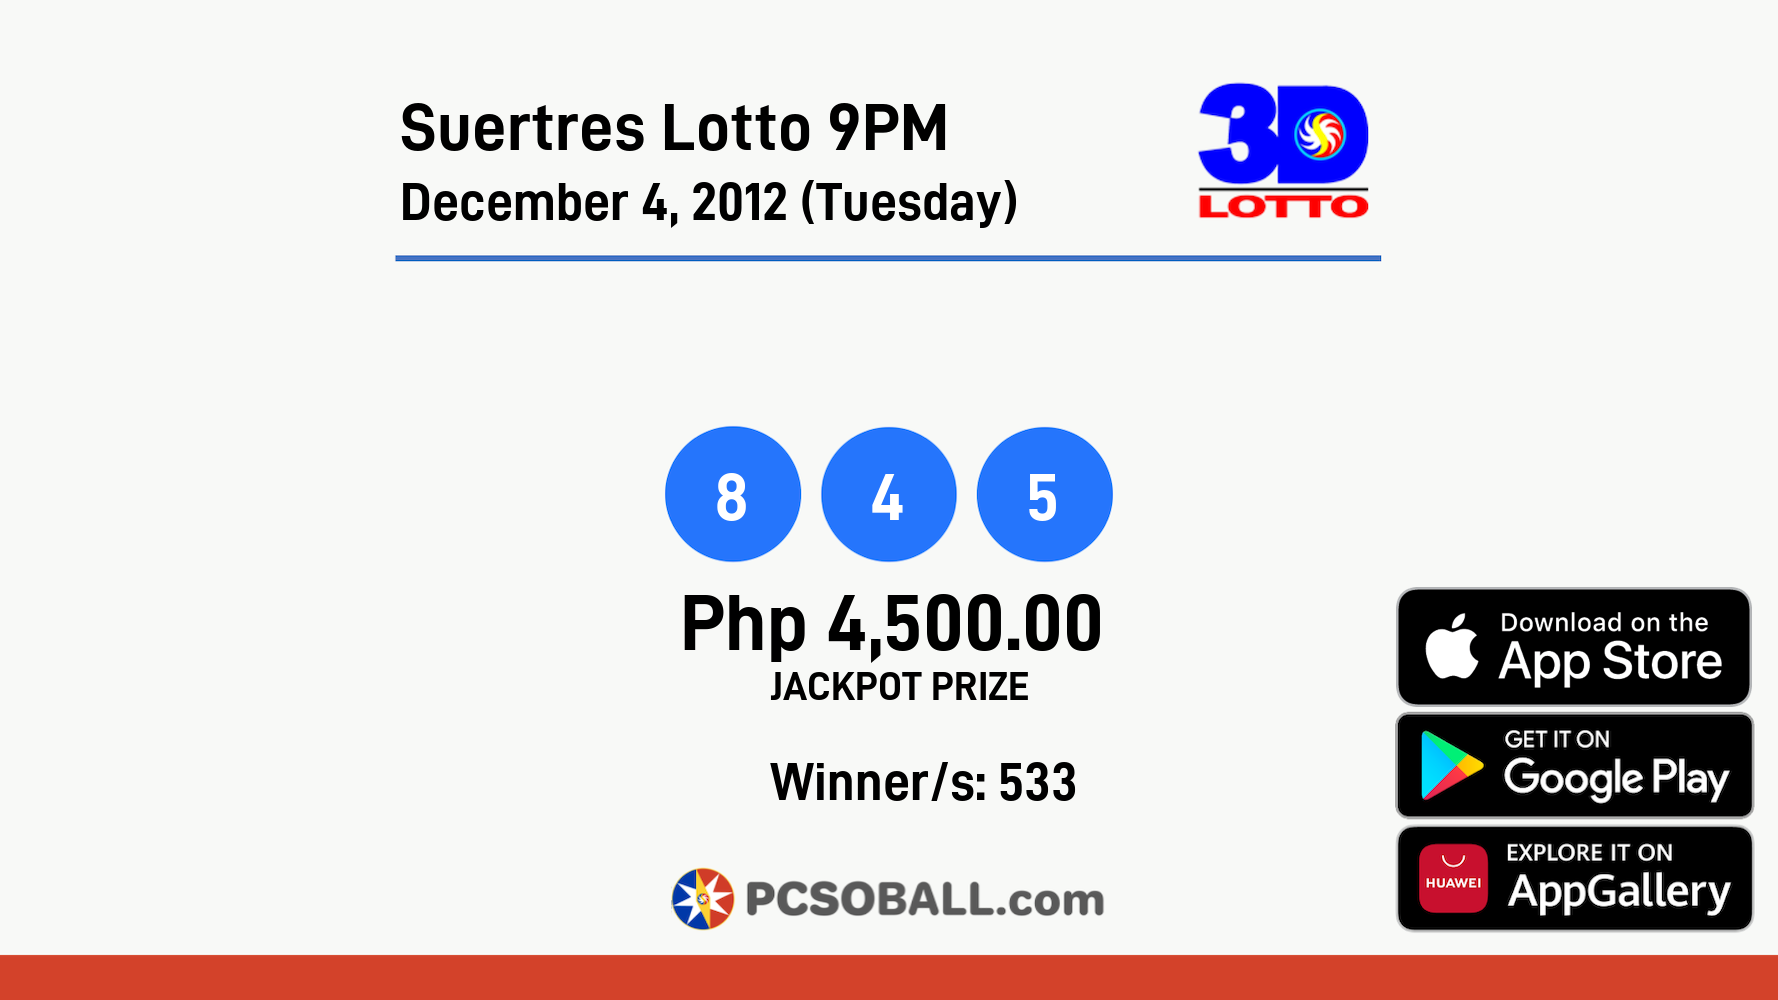 Suertres Lotto 9PM December 4, 2012 (Tuesday) Result